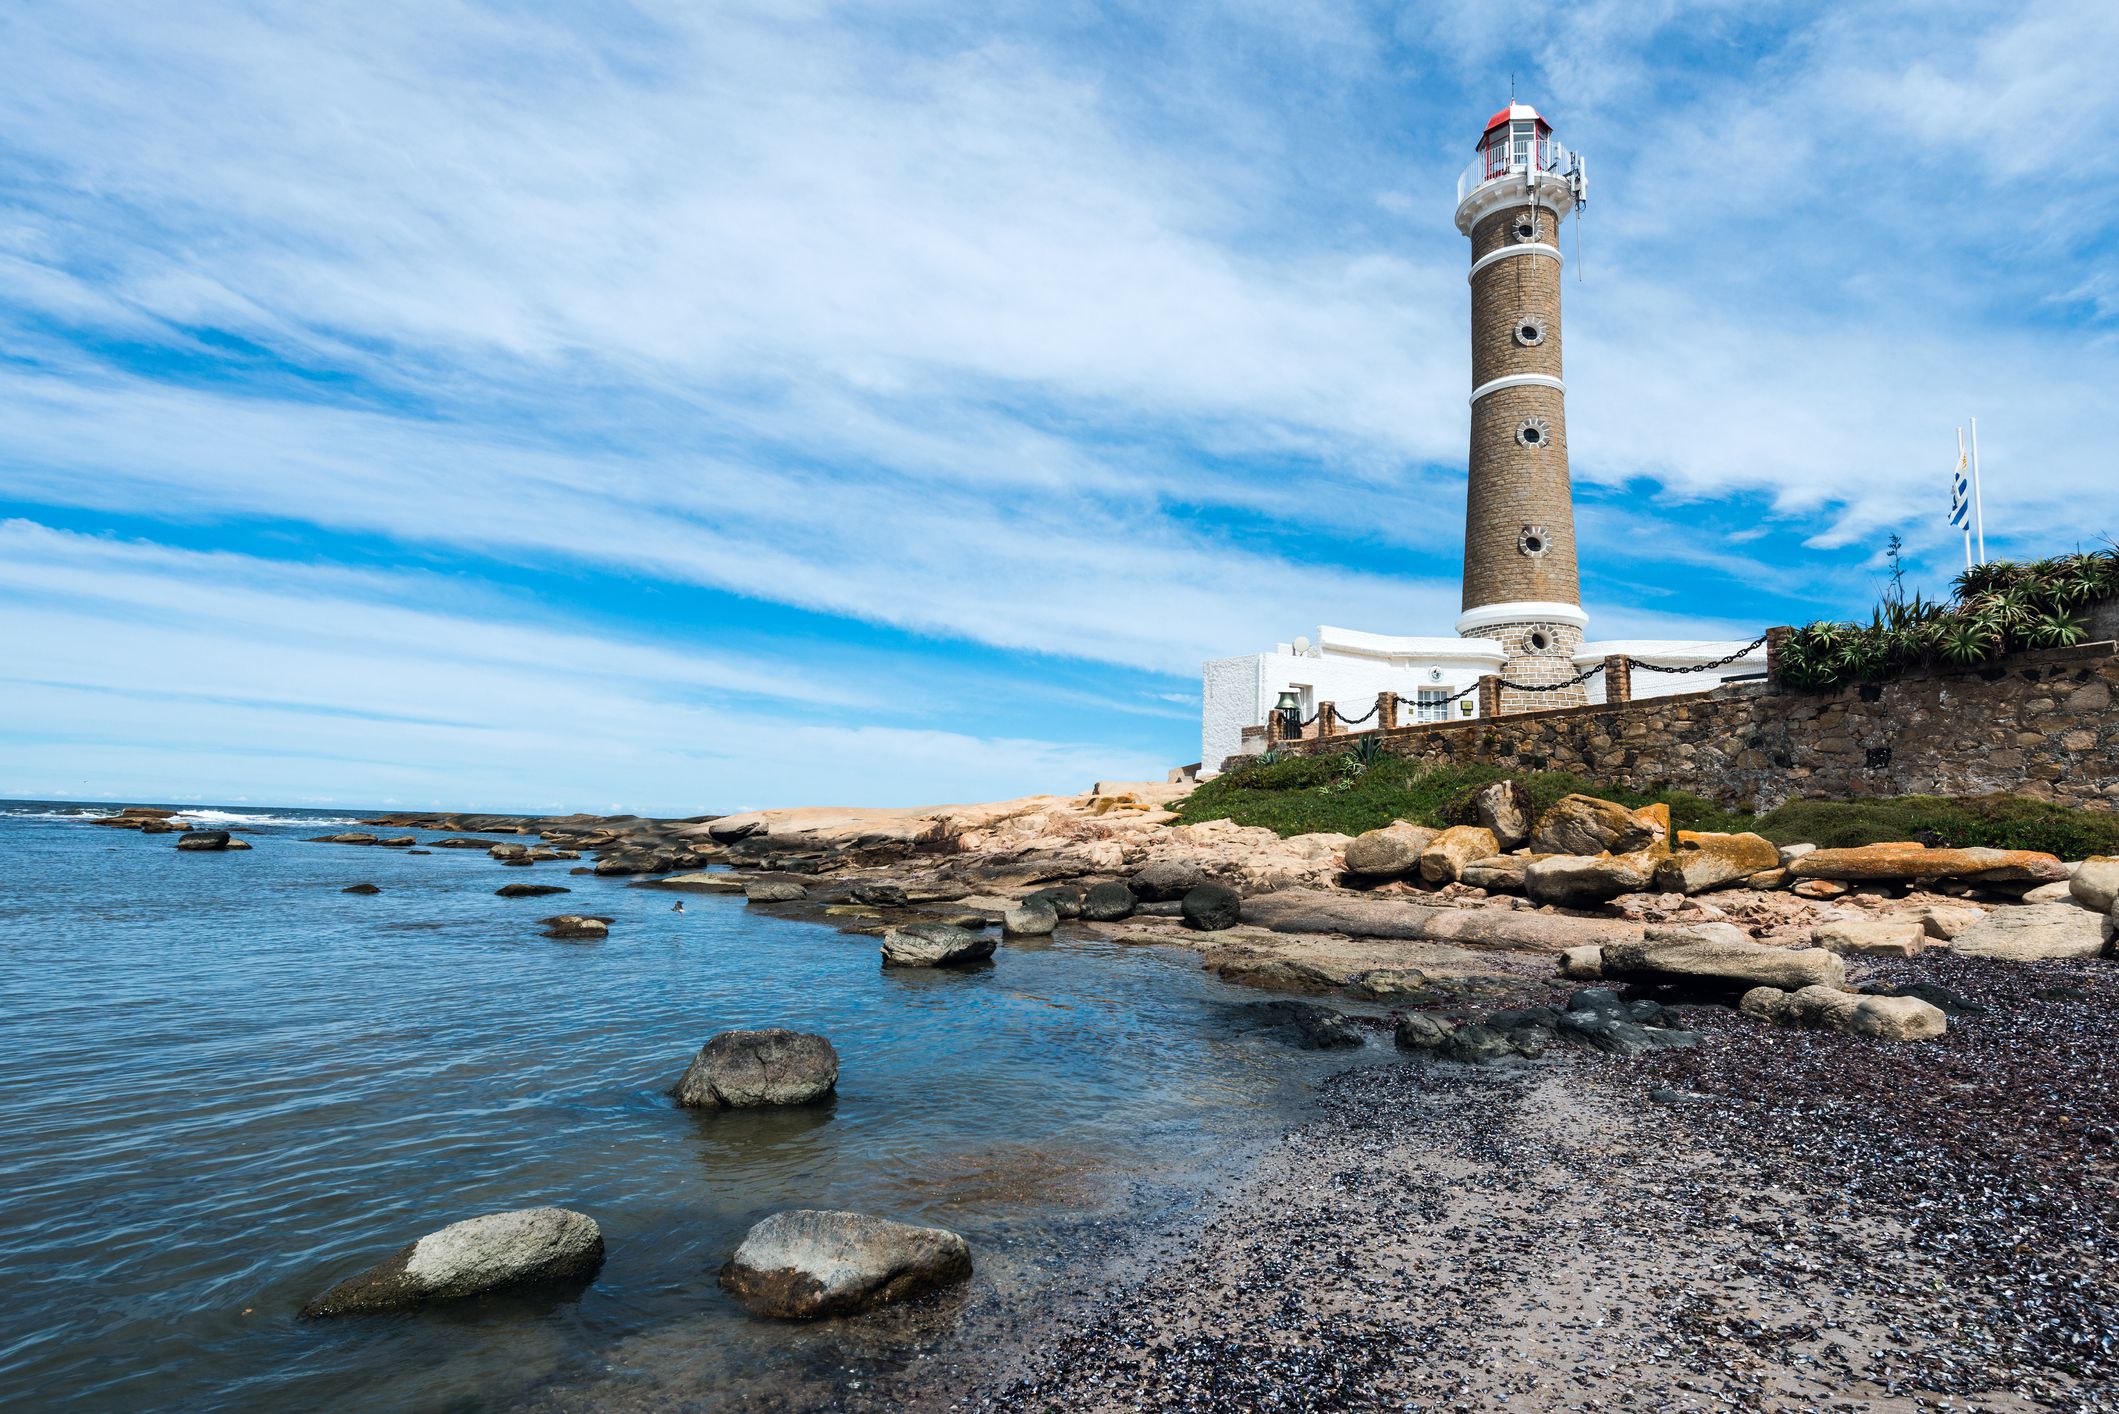 <p>Looking for a natural escape? Jose Ignacio may be a great fit for you! This country retreat has olive groves, vineyards, a lighthouse and beach bungalows. It’s the perfect place to reconnect with nature while still being close to resort luxuries … and great grilled seafood!</p>